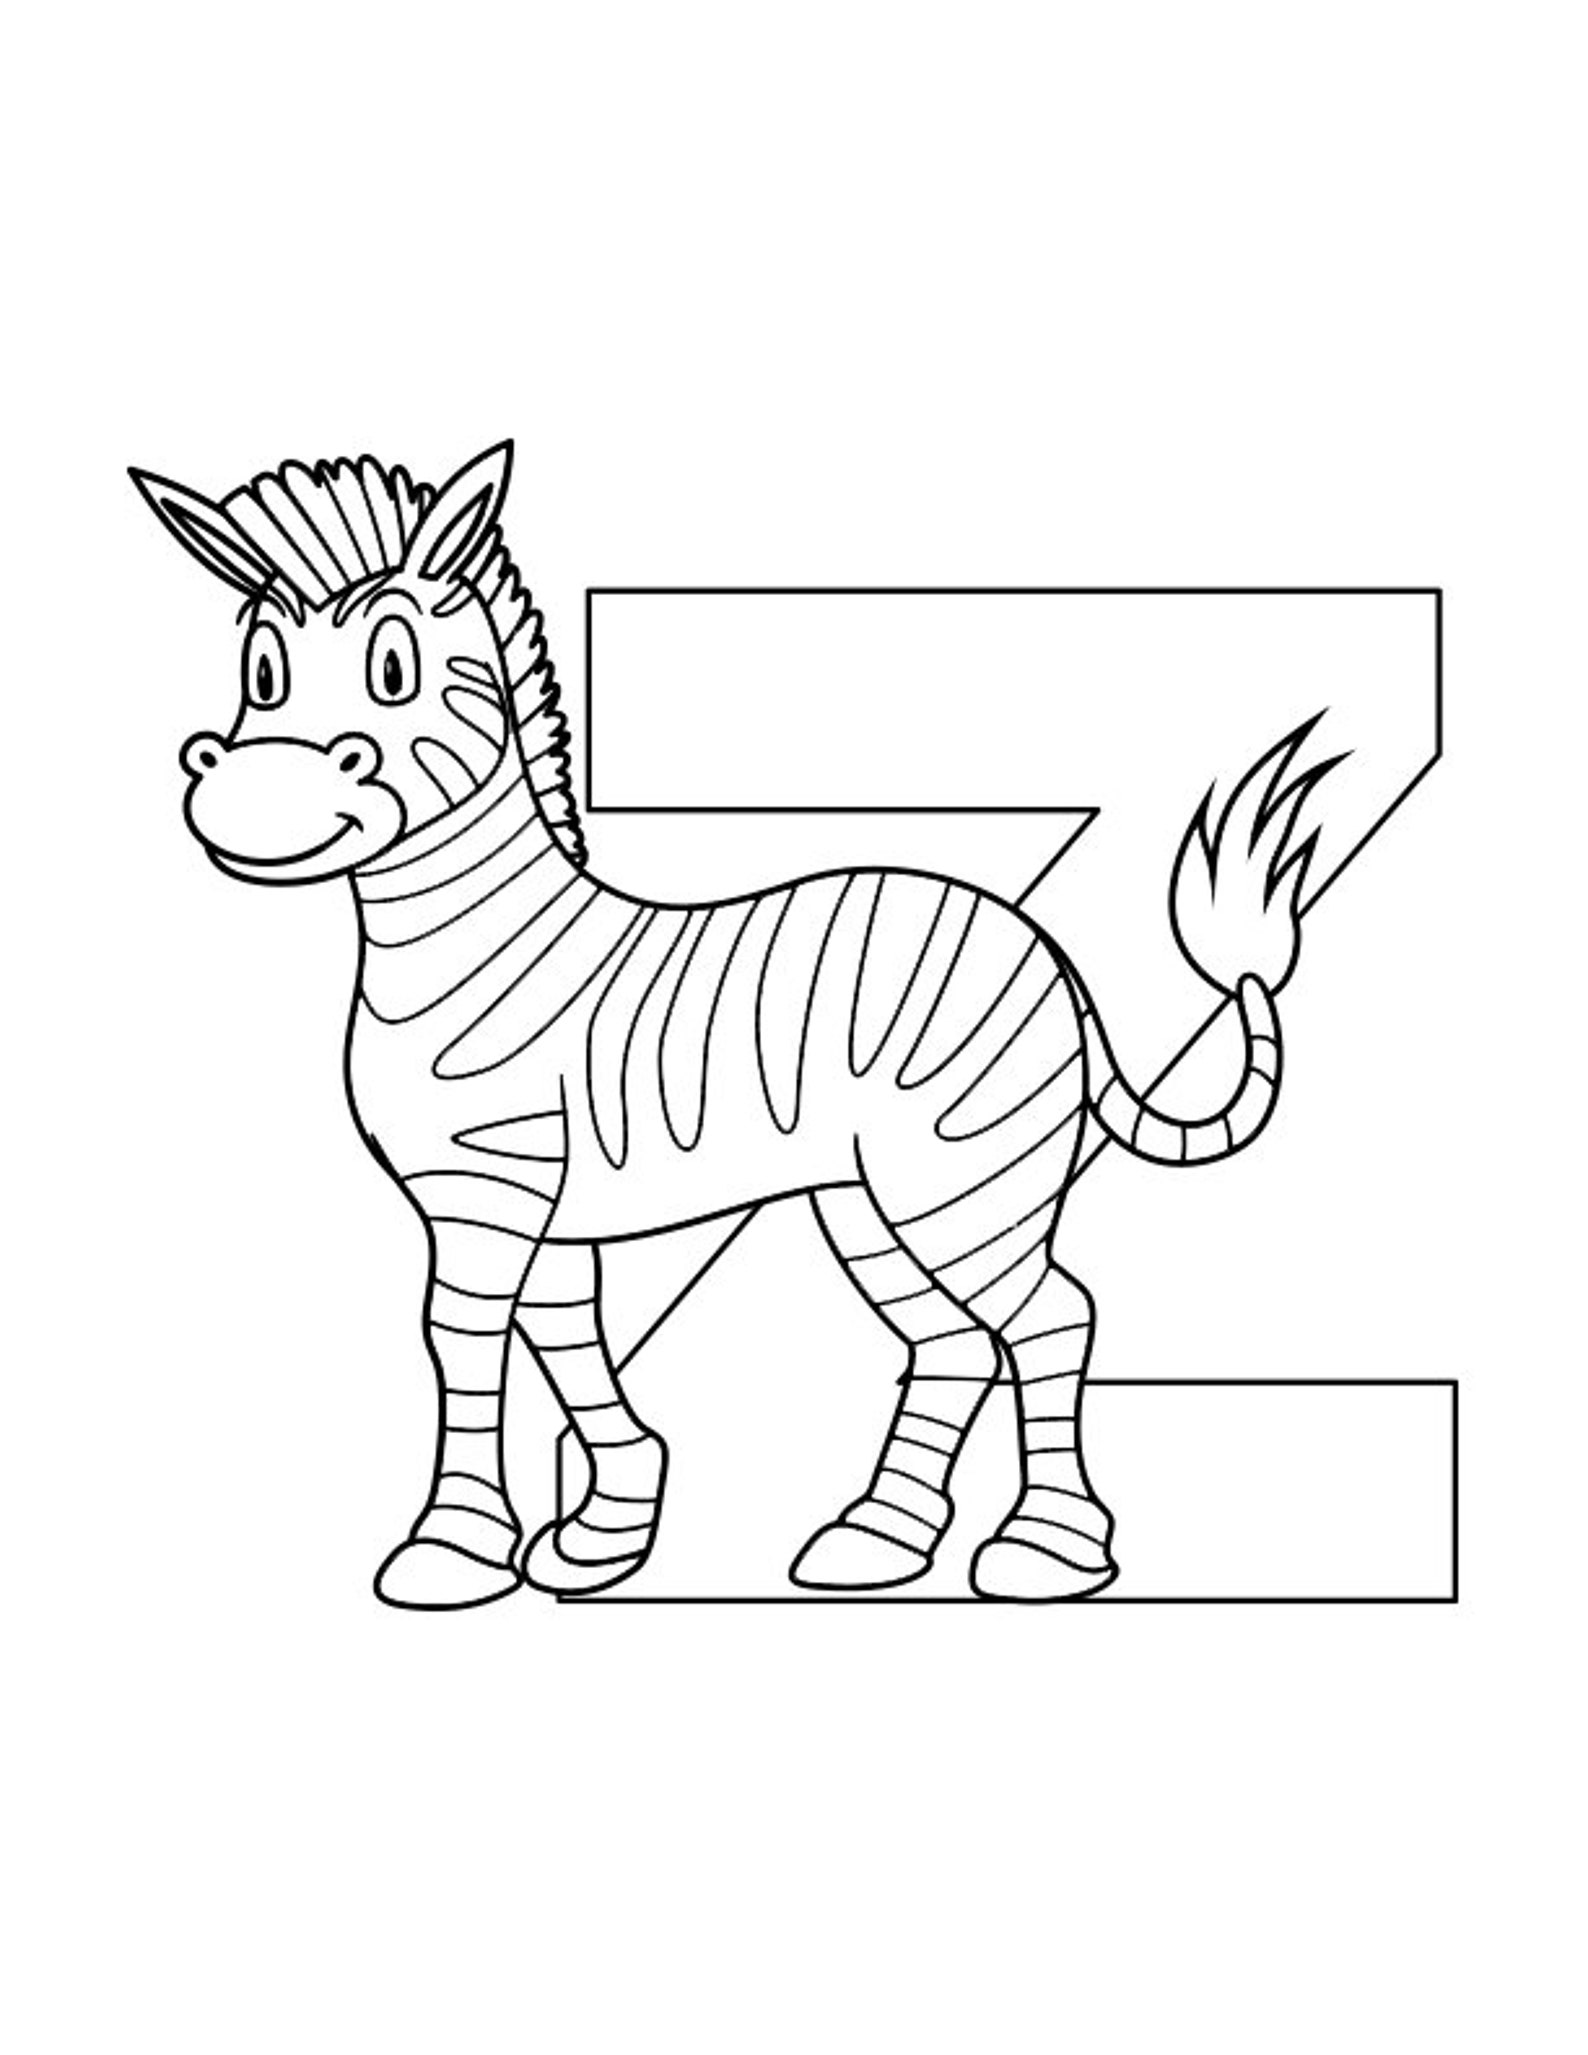 Alphabet Animals Coloring Pages for Kids ABC Printable - Etsy